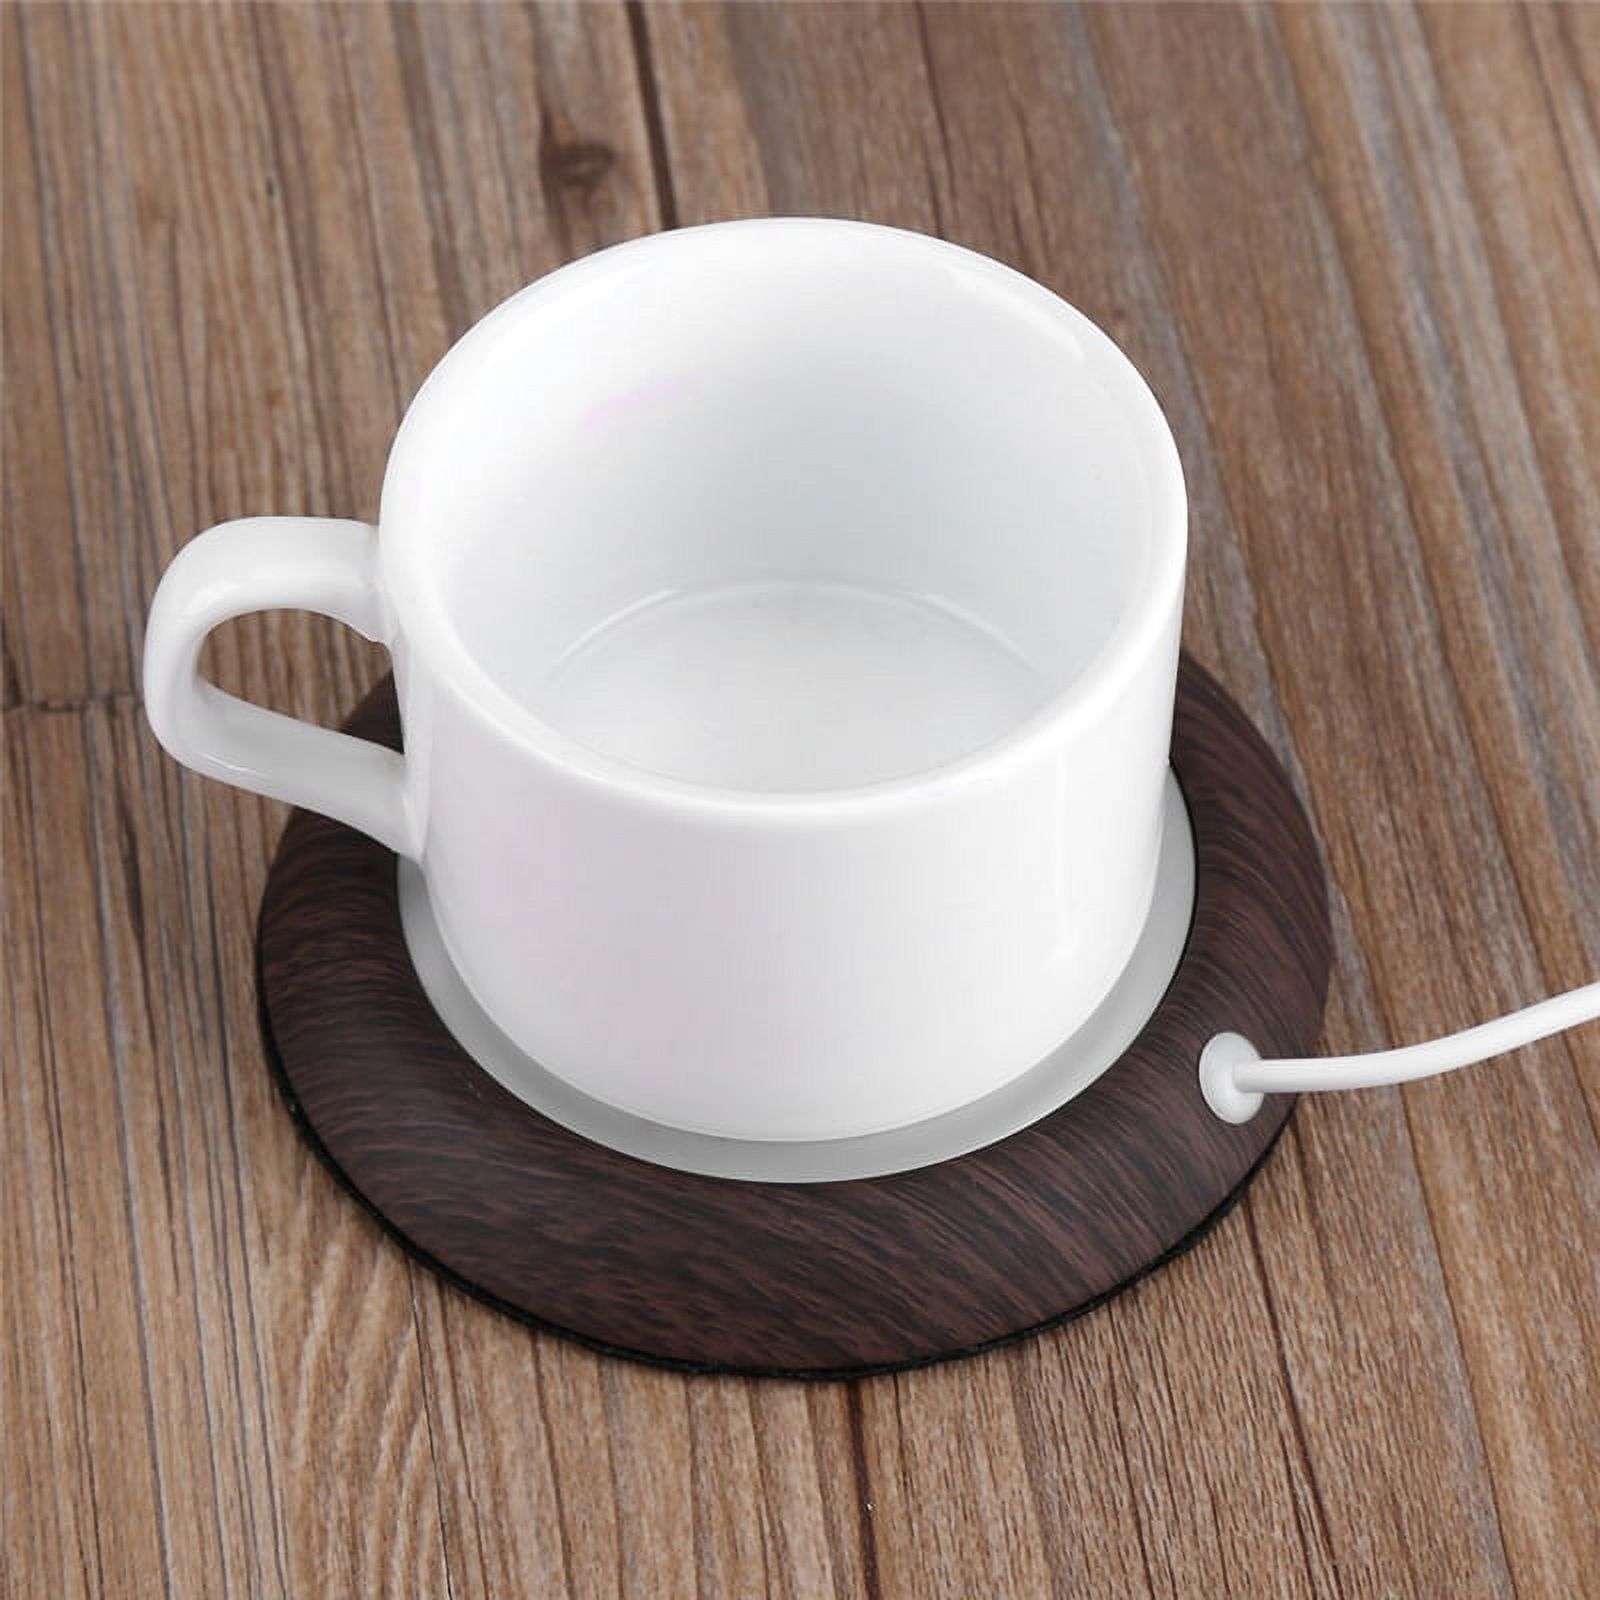 Cup Heater, Portable Cup Mug Warmer Heating Pad, Wooden Grain Cup Water/Beverage/Coffee/Milk Electric Warmer Pad - Fit for Most Stainless Steel Cup, Ceramic Cup, Glass Cup, Feeding Bottle - image 3 of 8